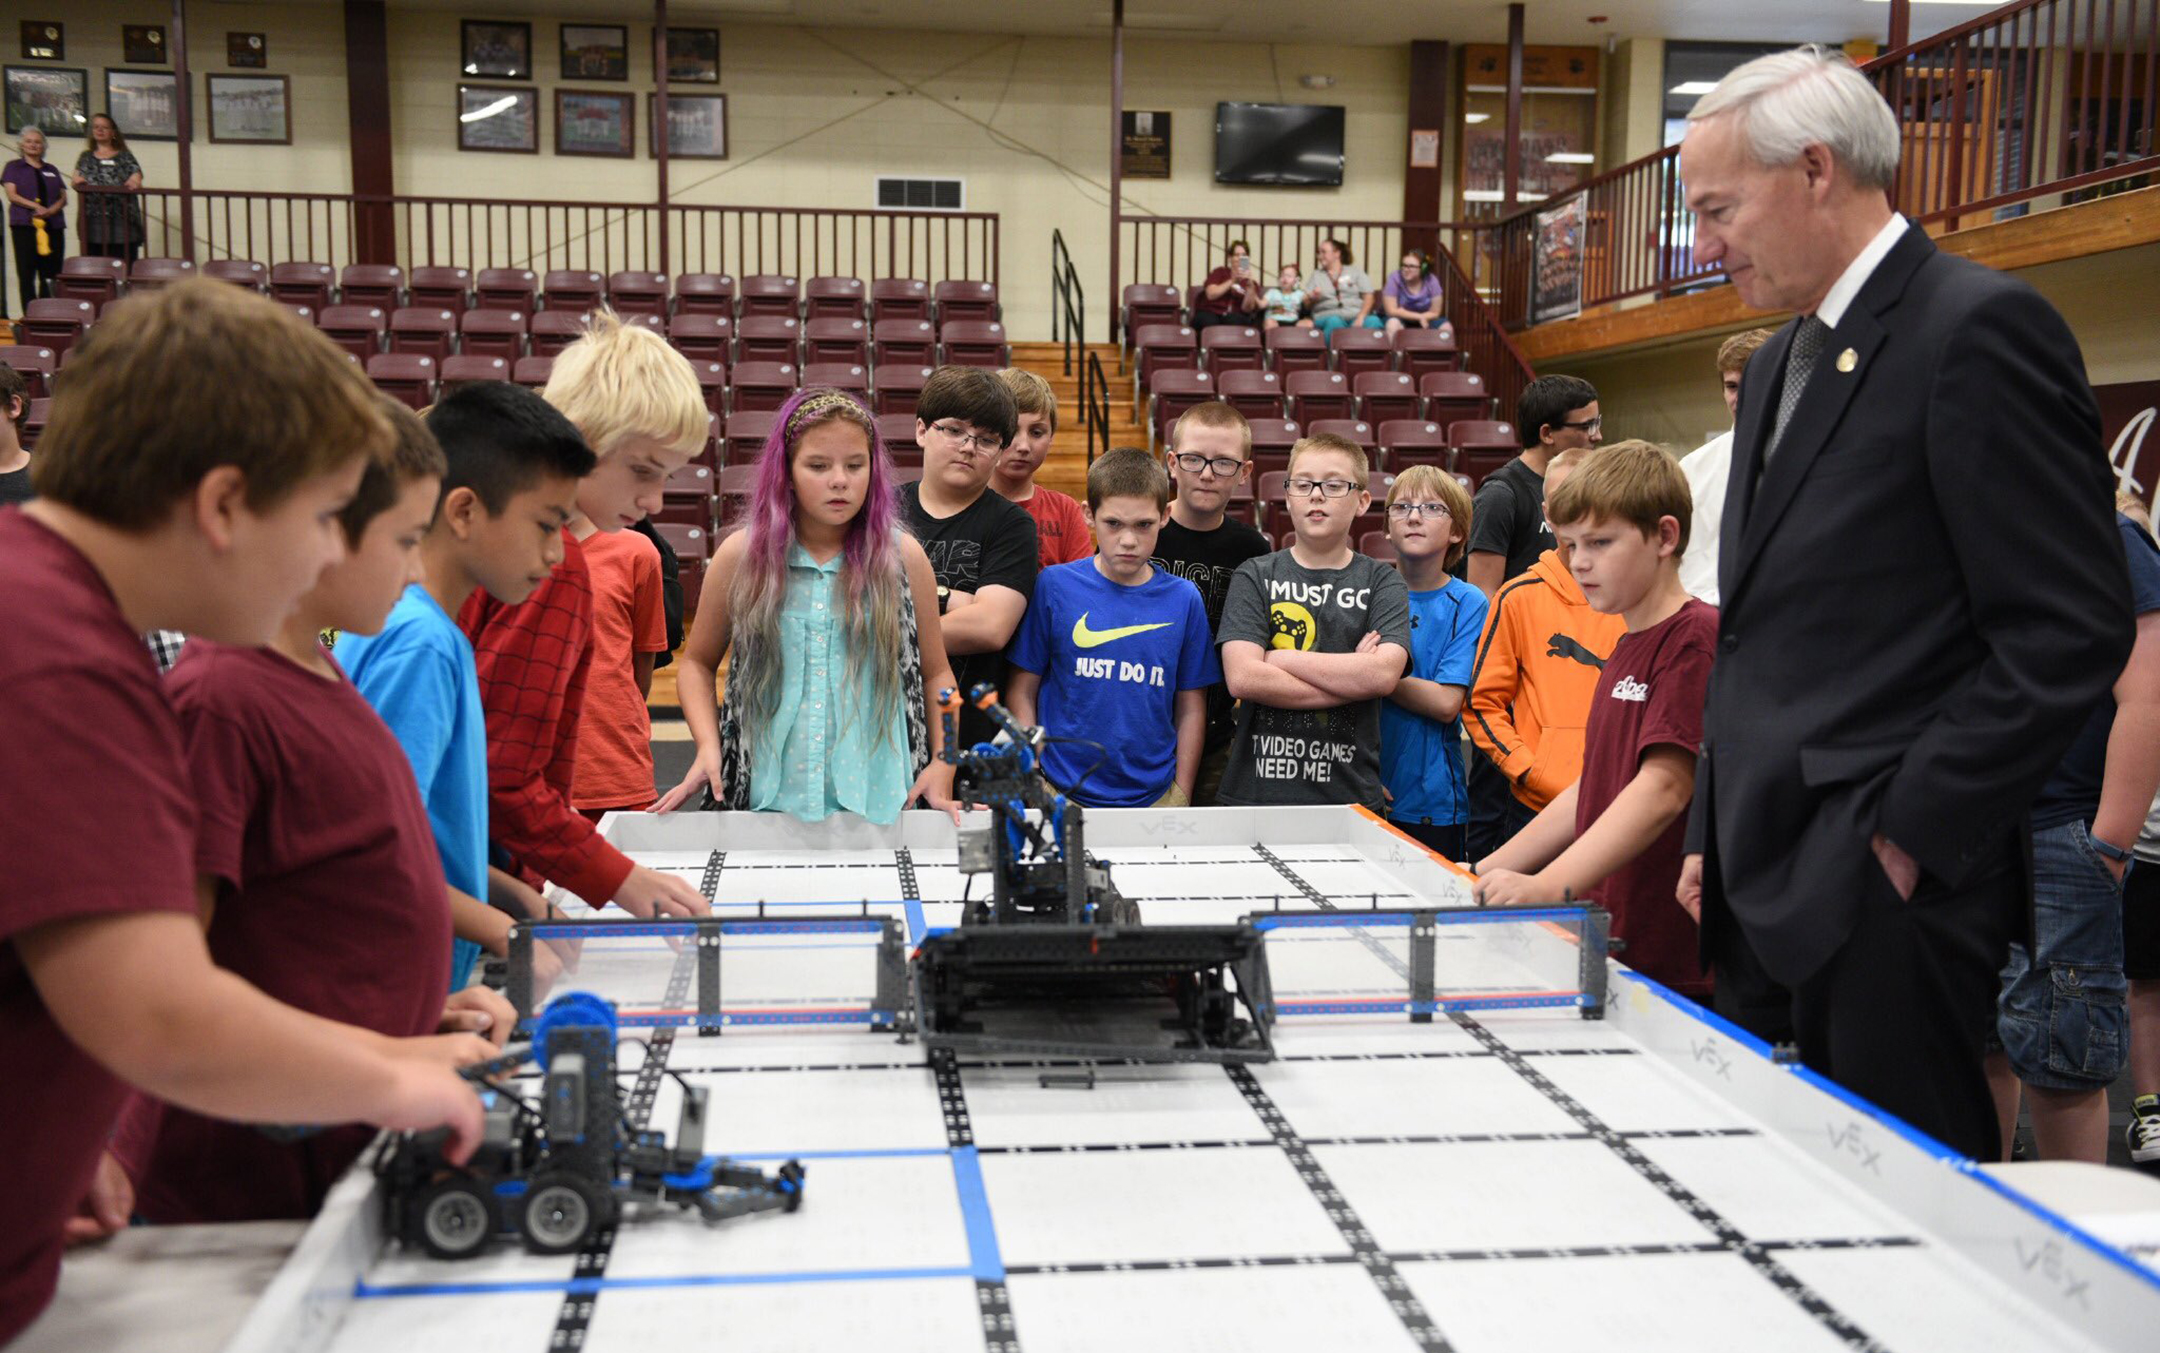 Asa Hutchinson, on the right, stands with a dozen students around a robotics table